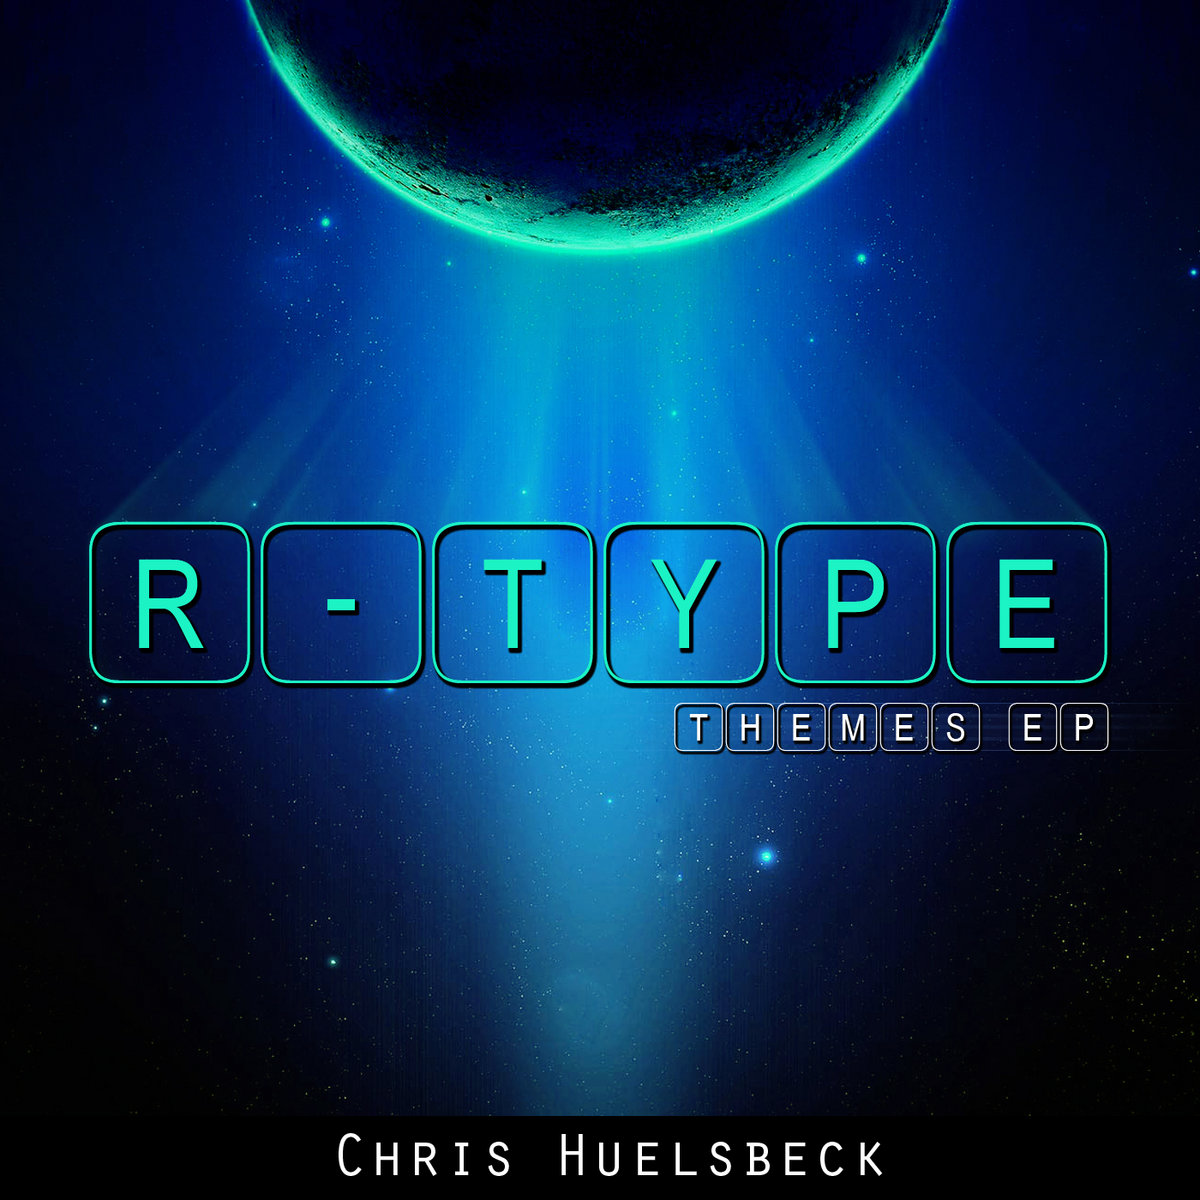 R-Type Themes EP